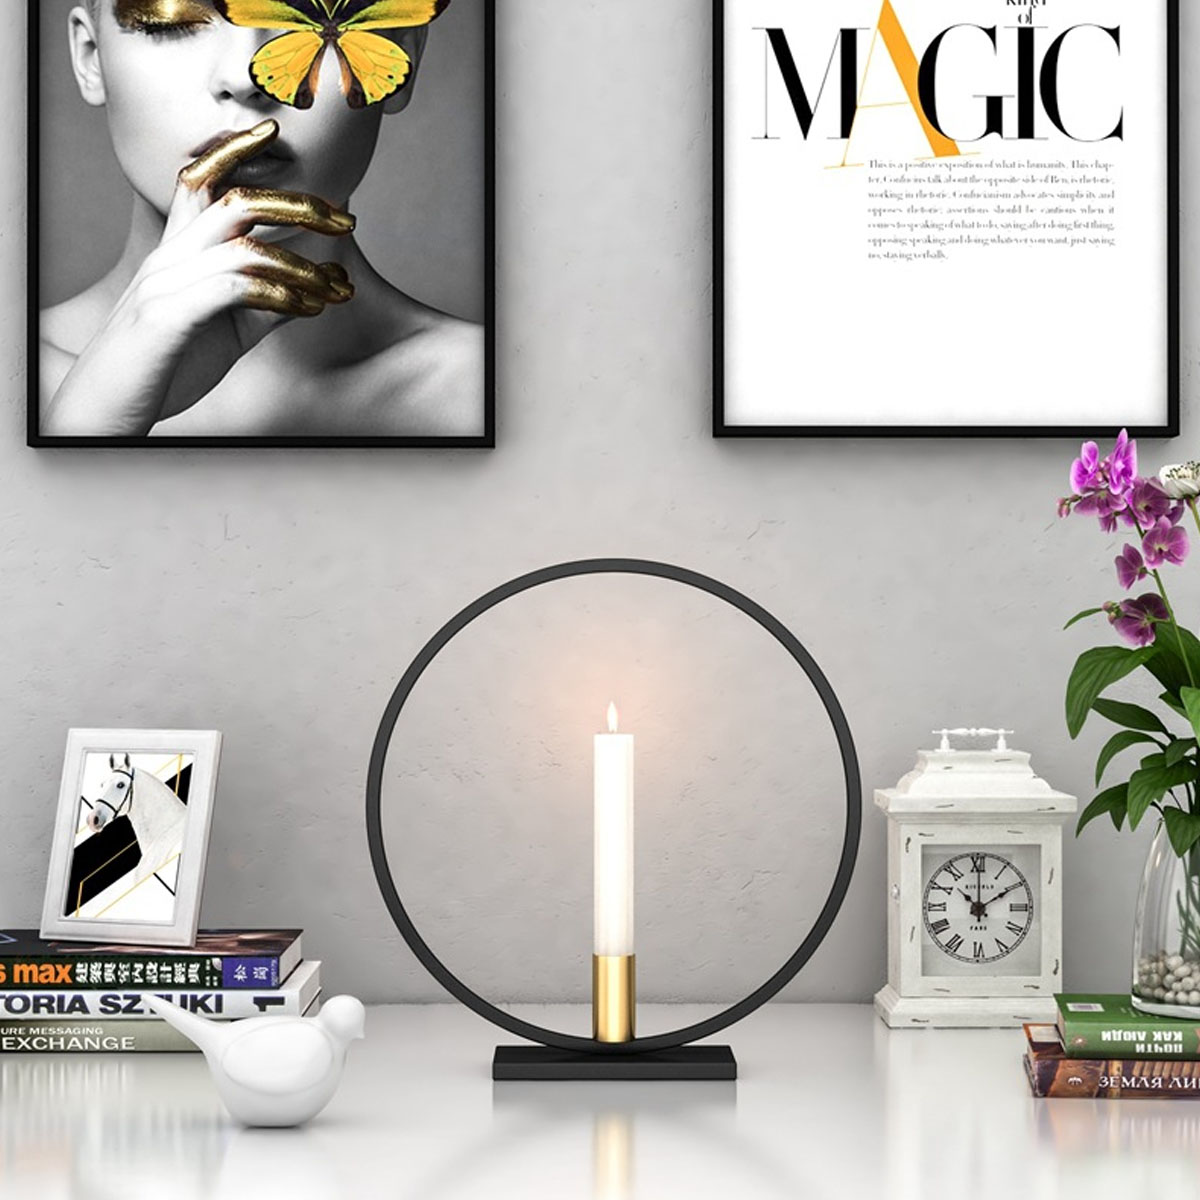 Nordic-Style-Geometric-Candlestick-Metal-Wall-Candle-Holder-Home-Wall-Decor-1476997-4